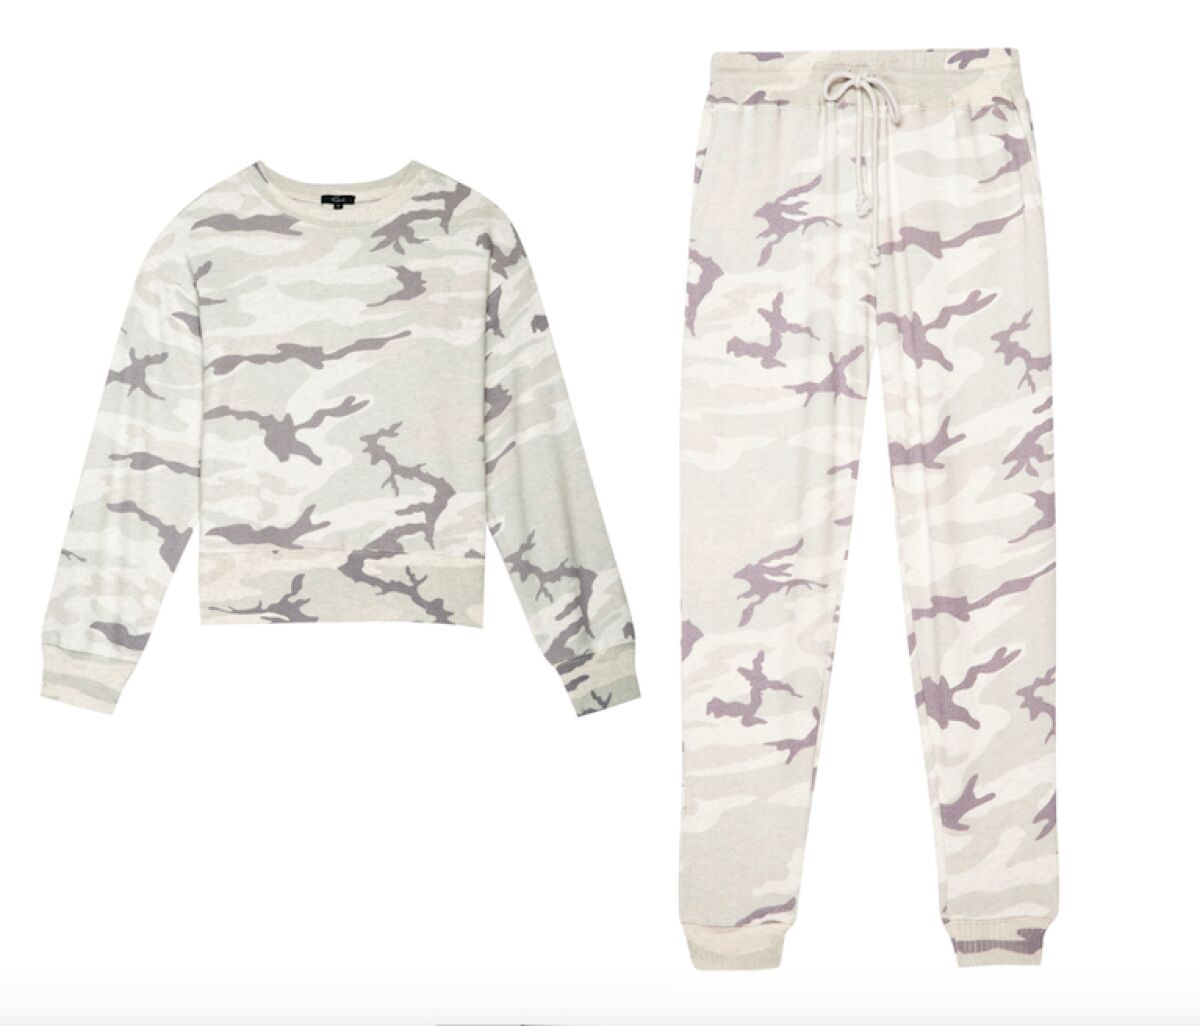 Rails' Ramona top and Oakland bottoms in stone camo.